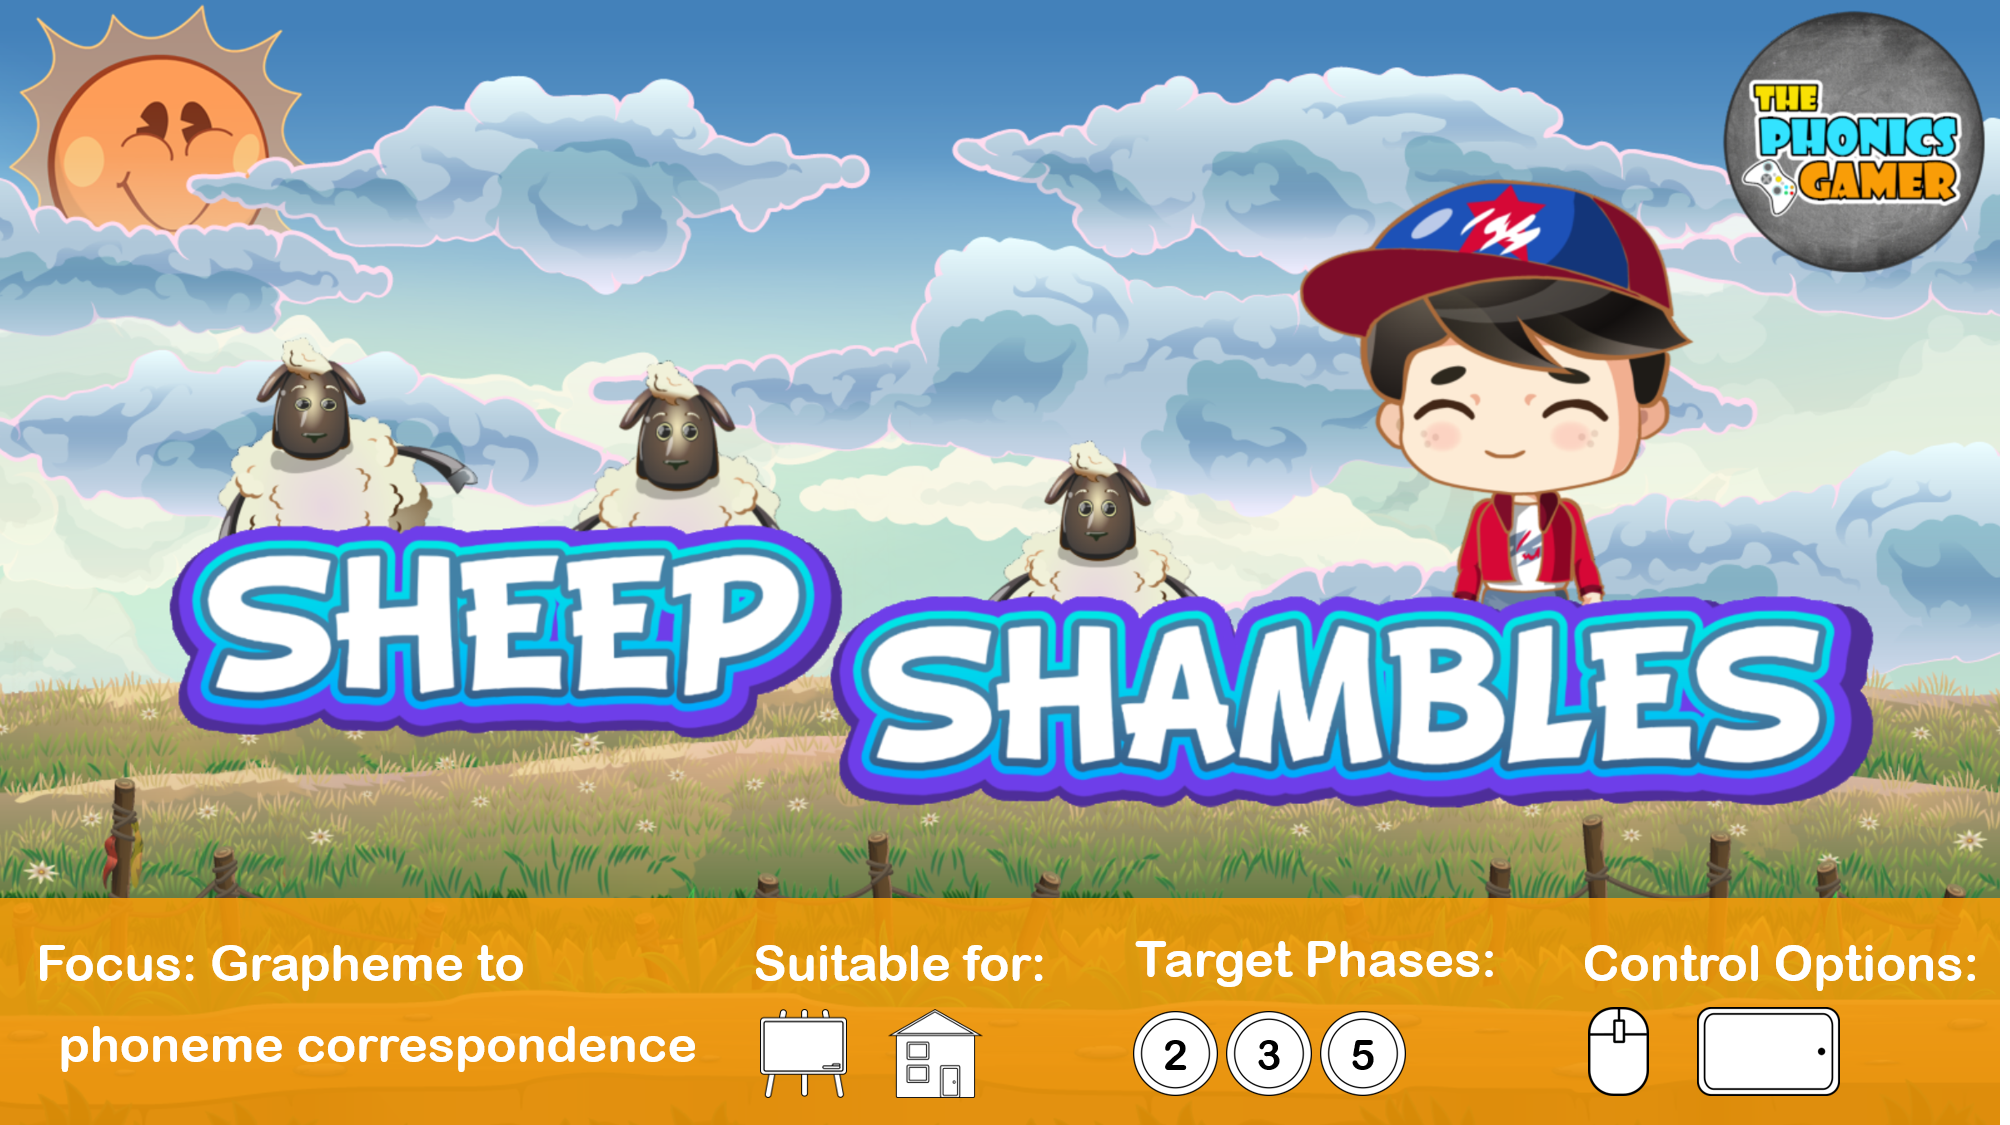 Sheep Shambles is available to play!